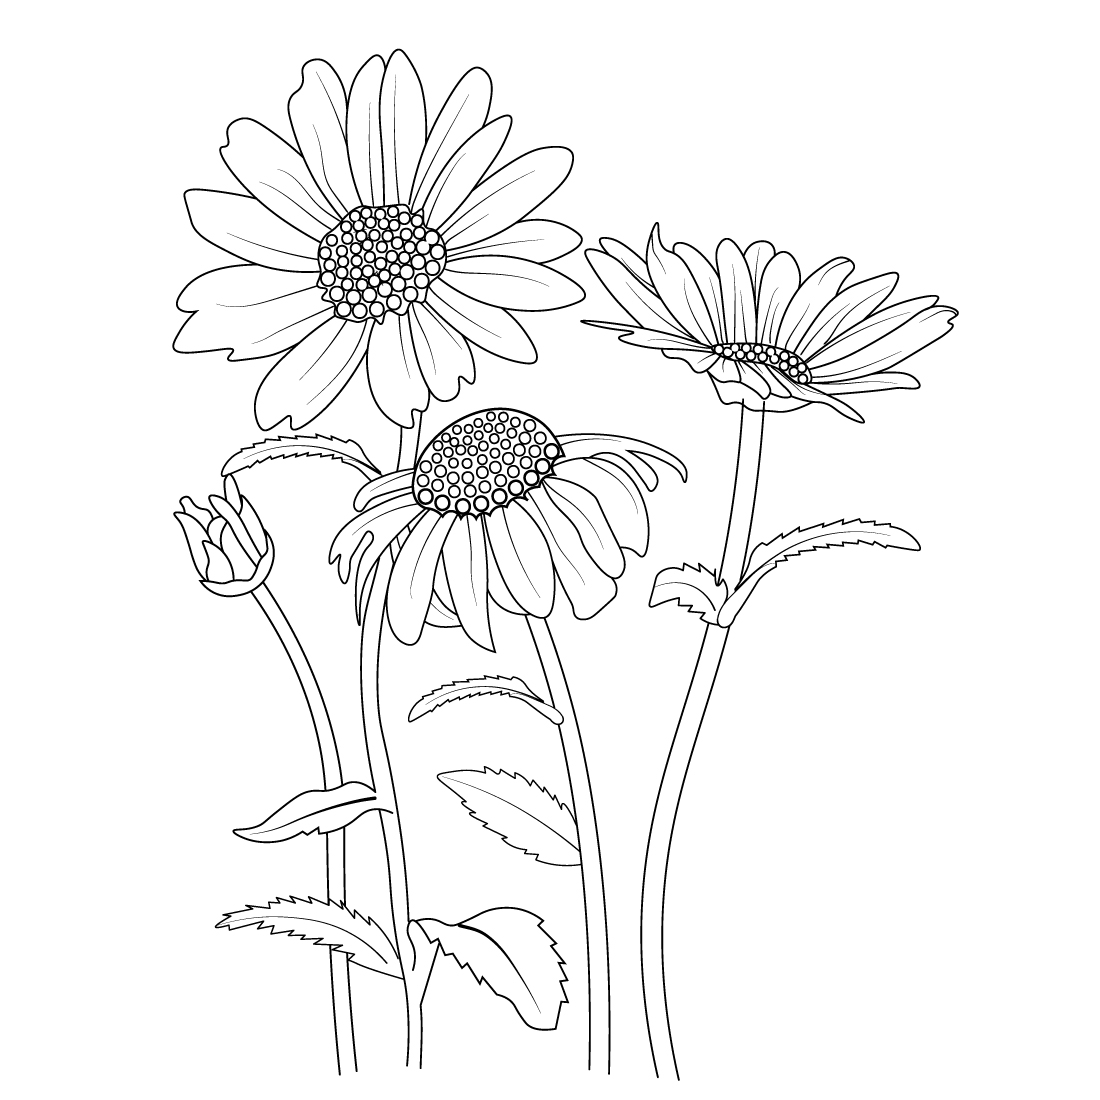 simple daisy flower drawing for kids, daisy flower line art, easy way to  draw a daisy flower